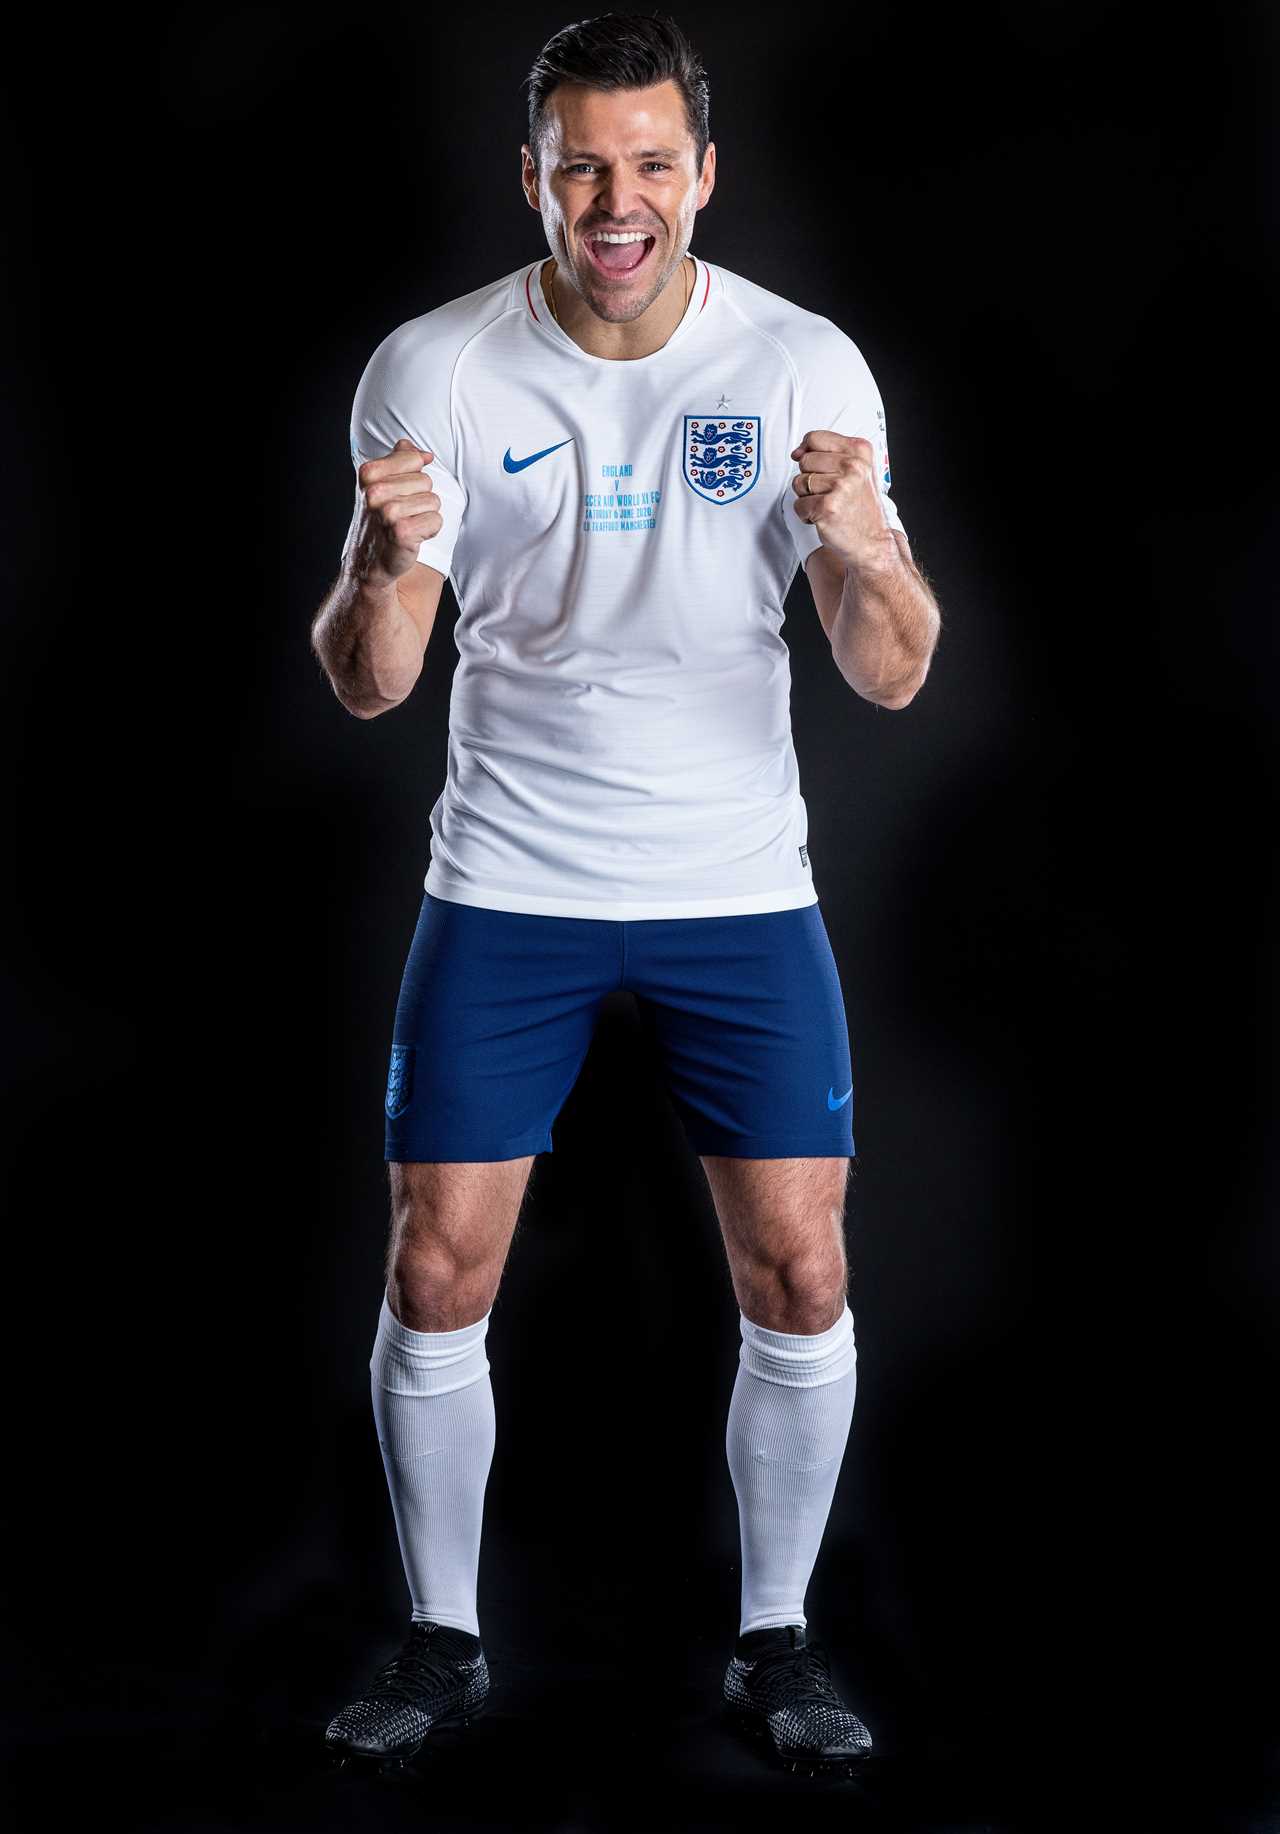 Danny Dyer finally joins Soccer Aid after nemesis Mark Wright steps down